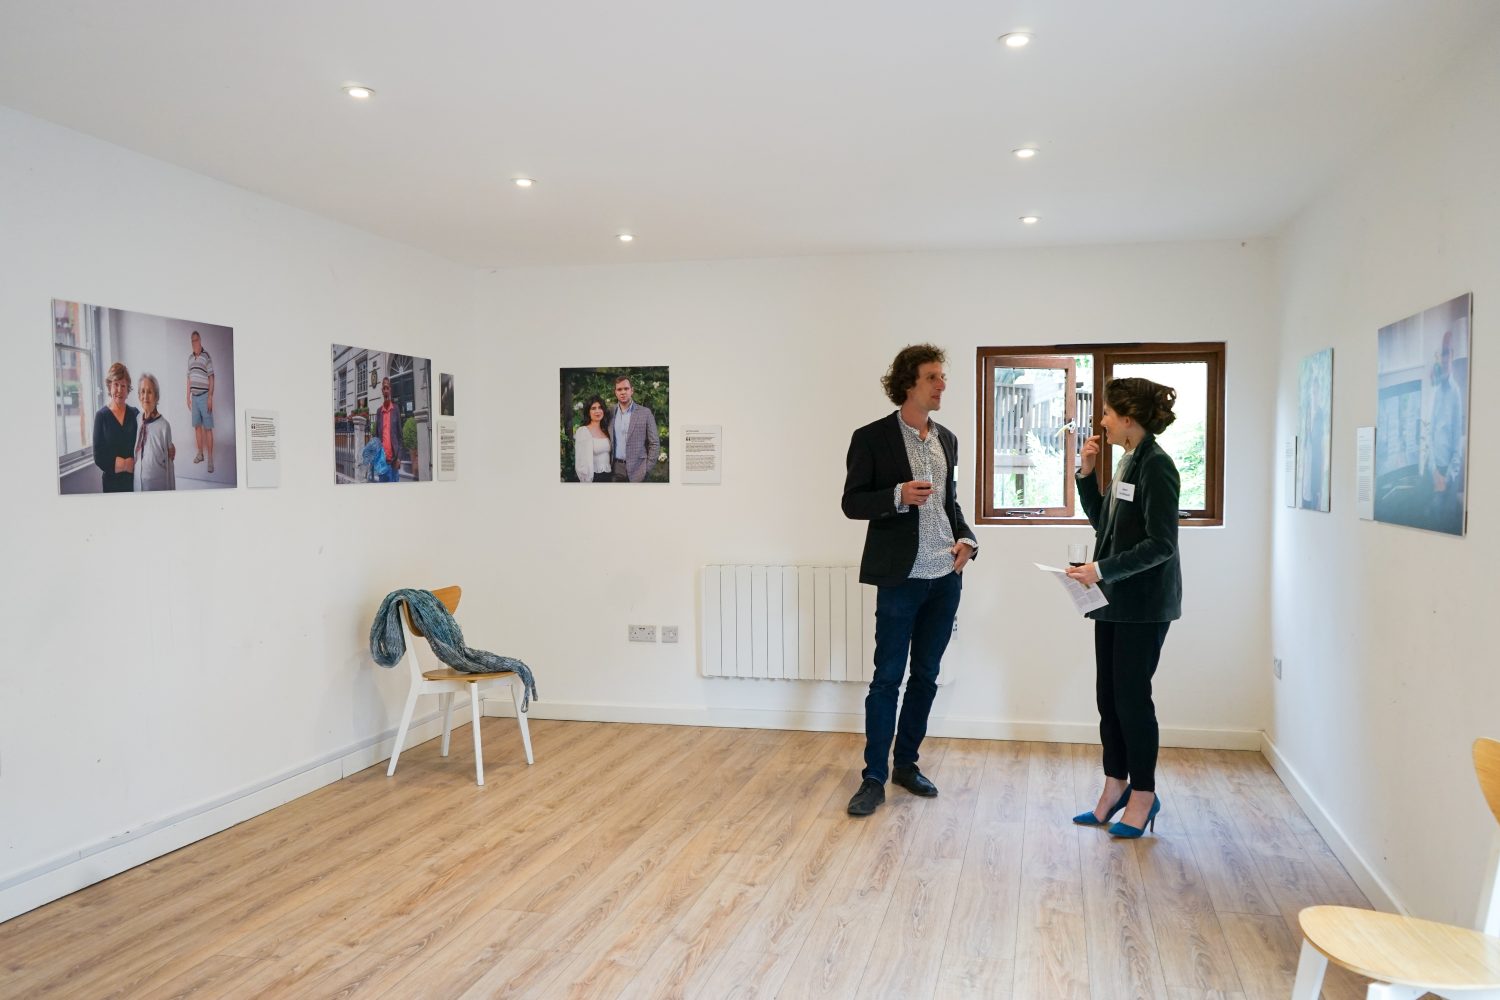 Two people standing talking in the corner of a room with a wooden floor, white walls, and pictures hung up around it.